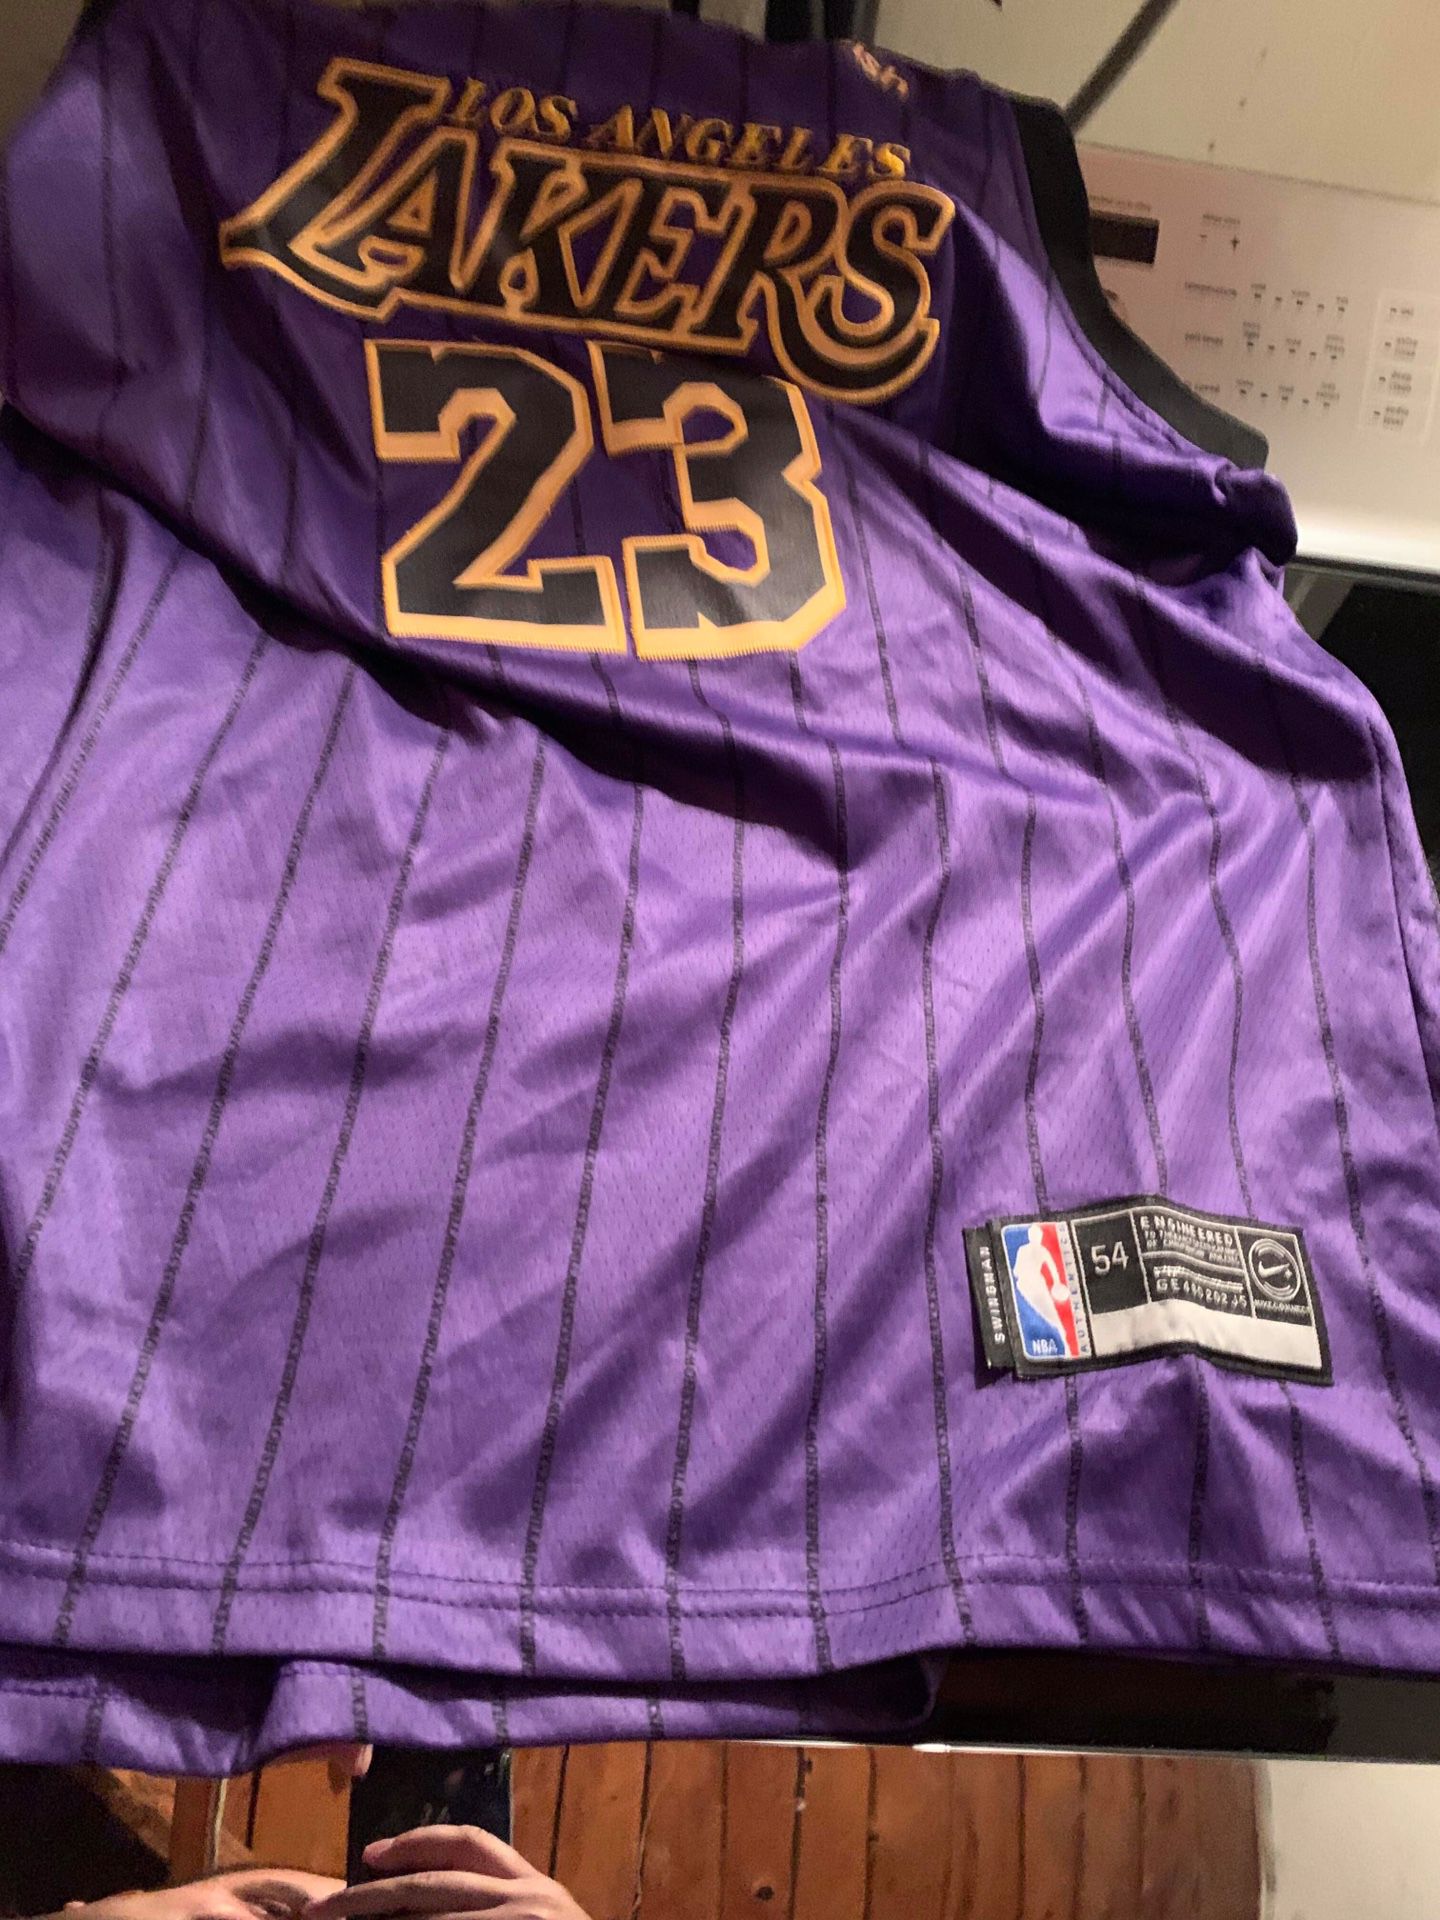 Brand new LeBron James Jersey for sale